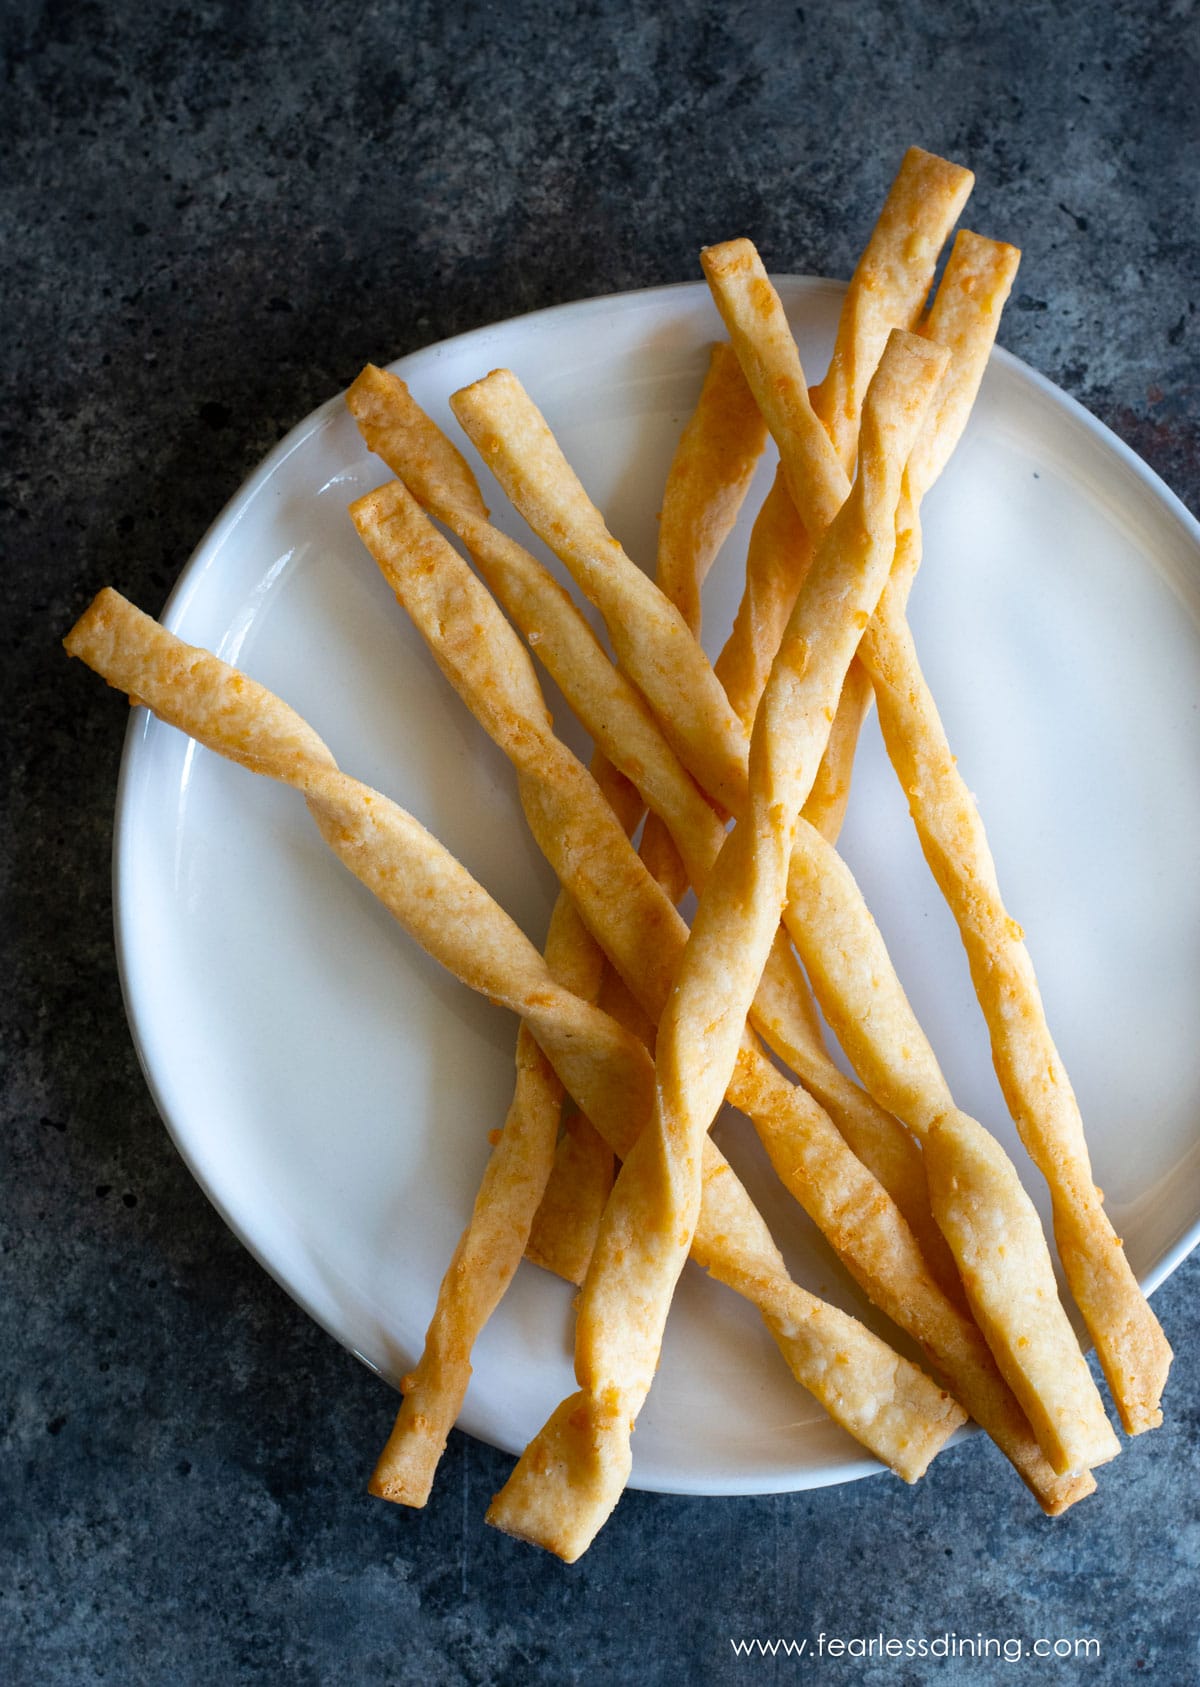 The gluten free cheese twists on a plate.